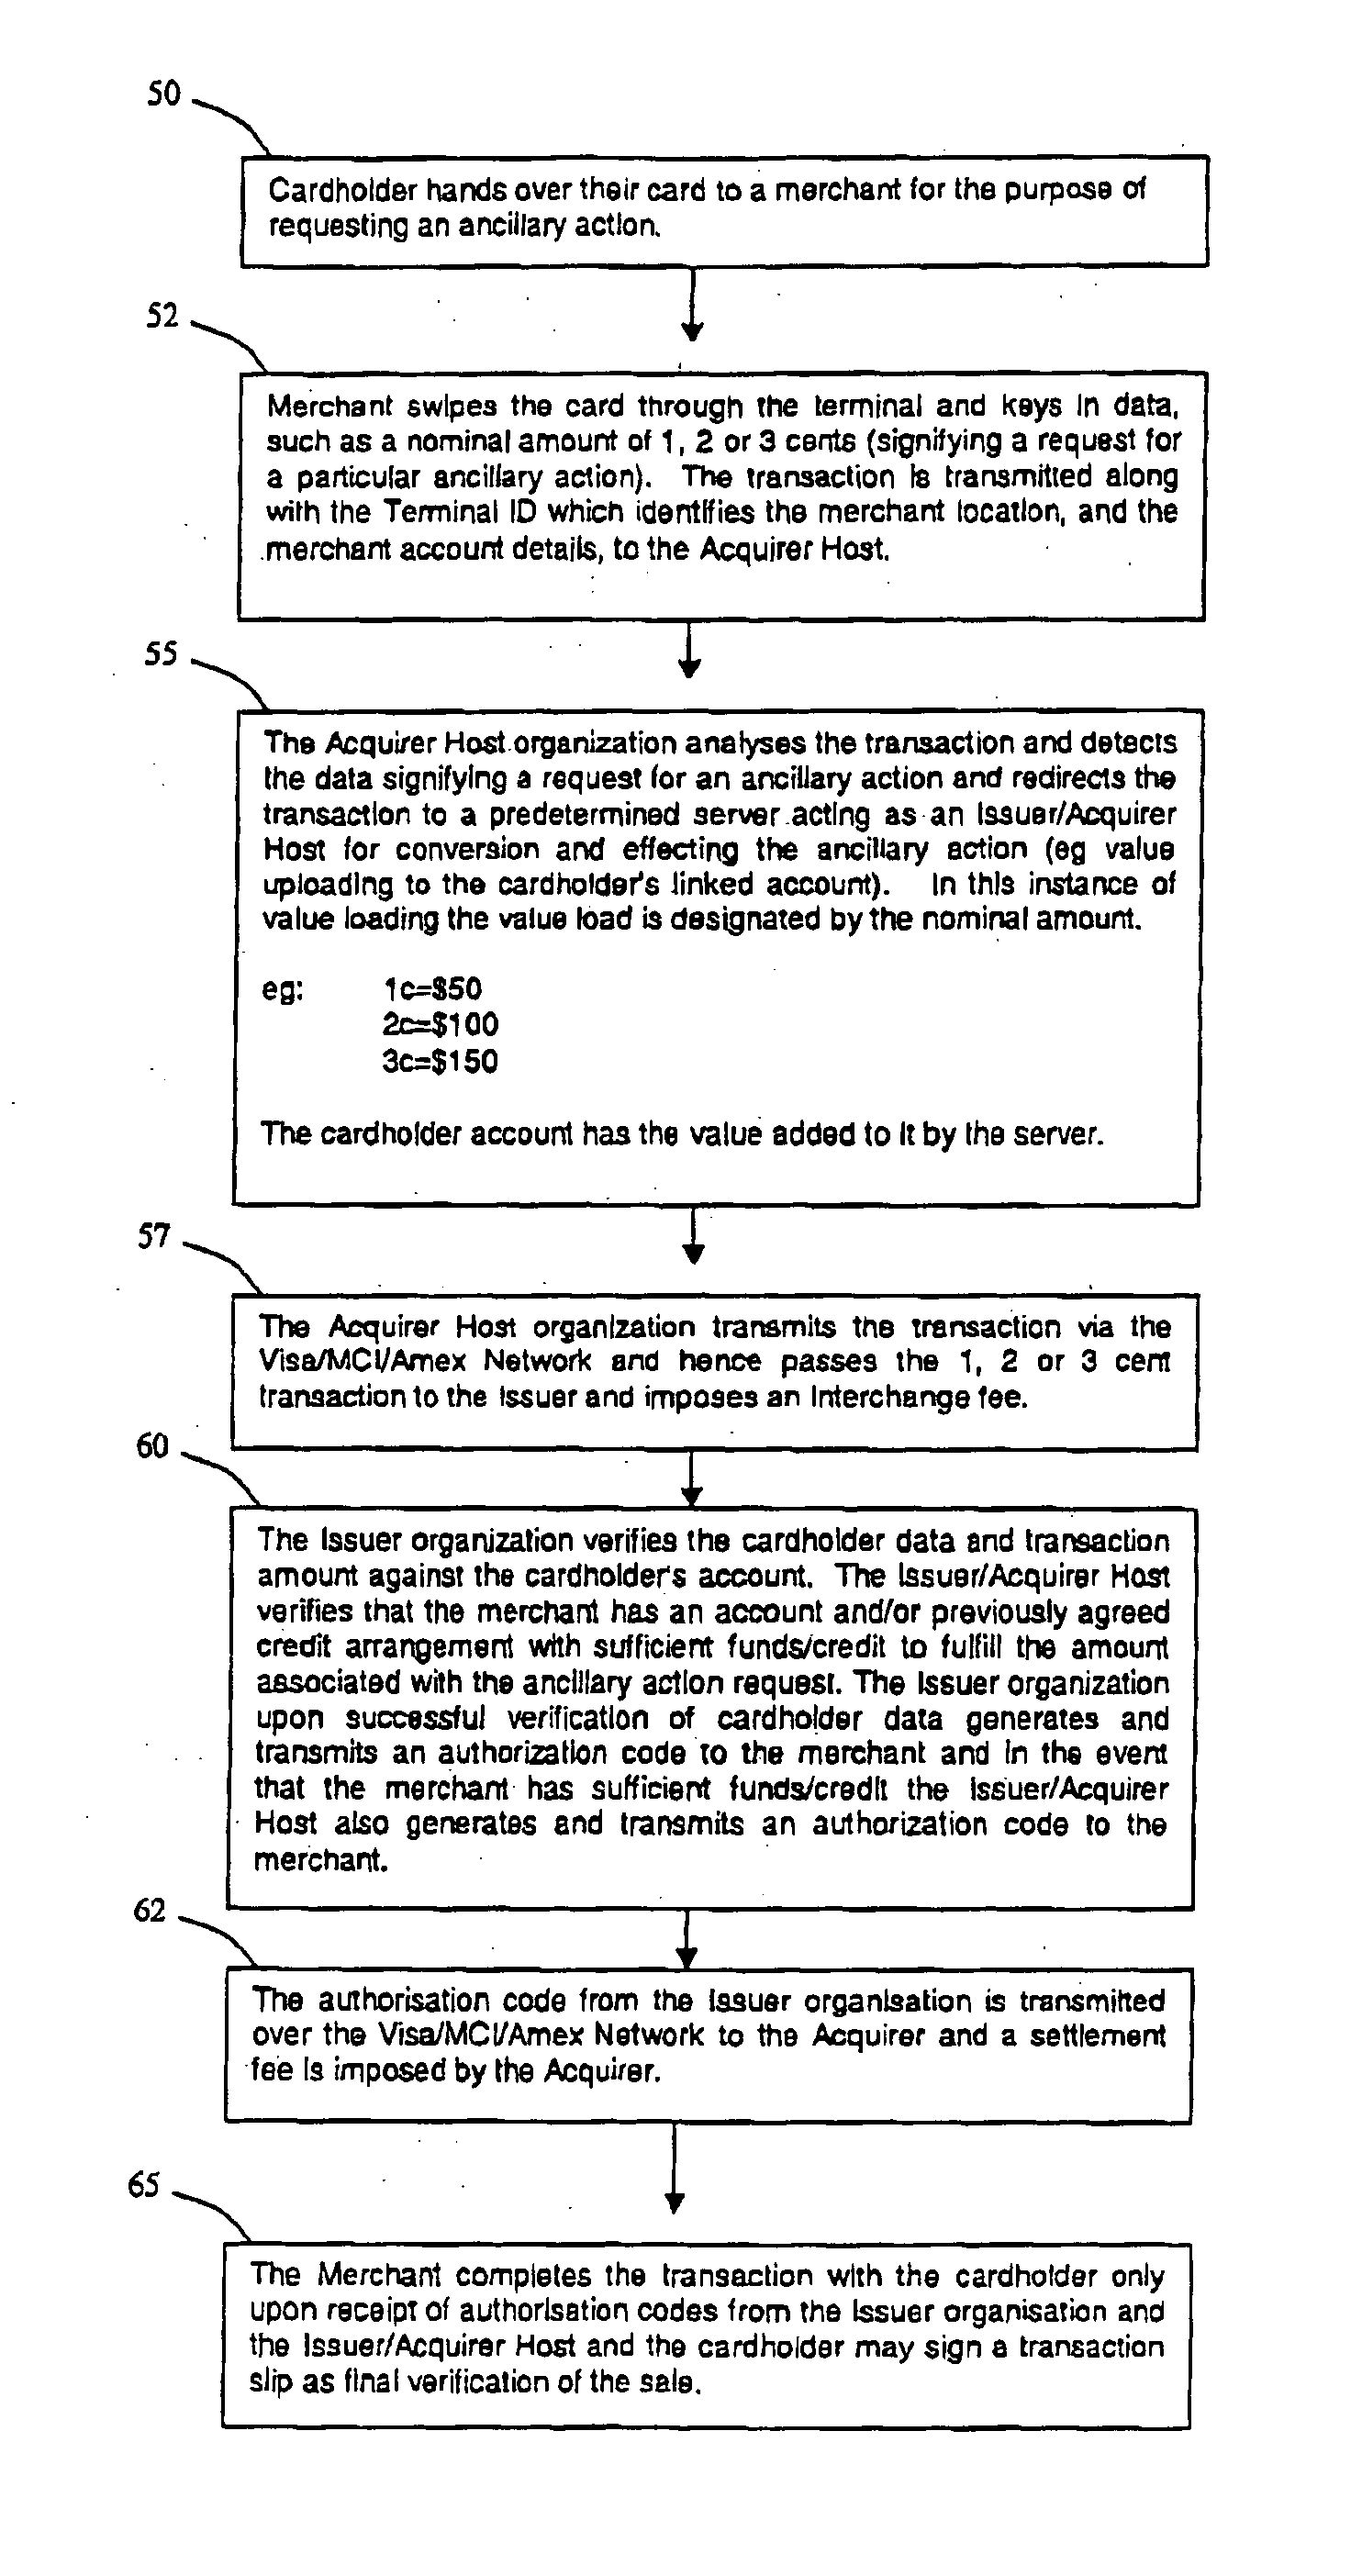 Effecting ancillary actions on a transaction network